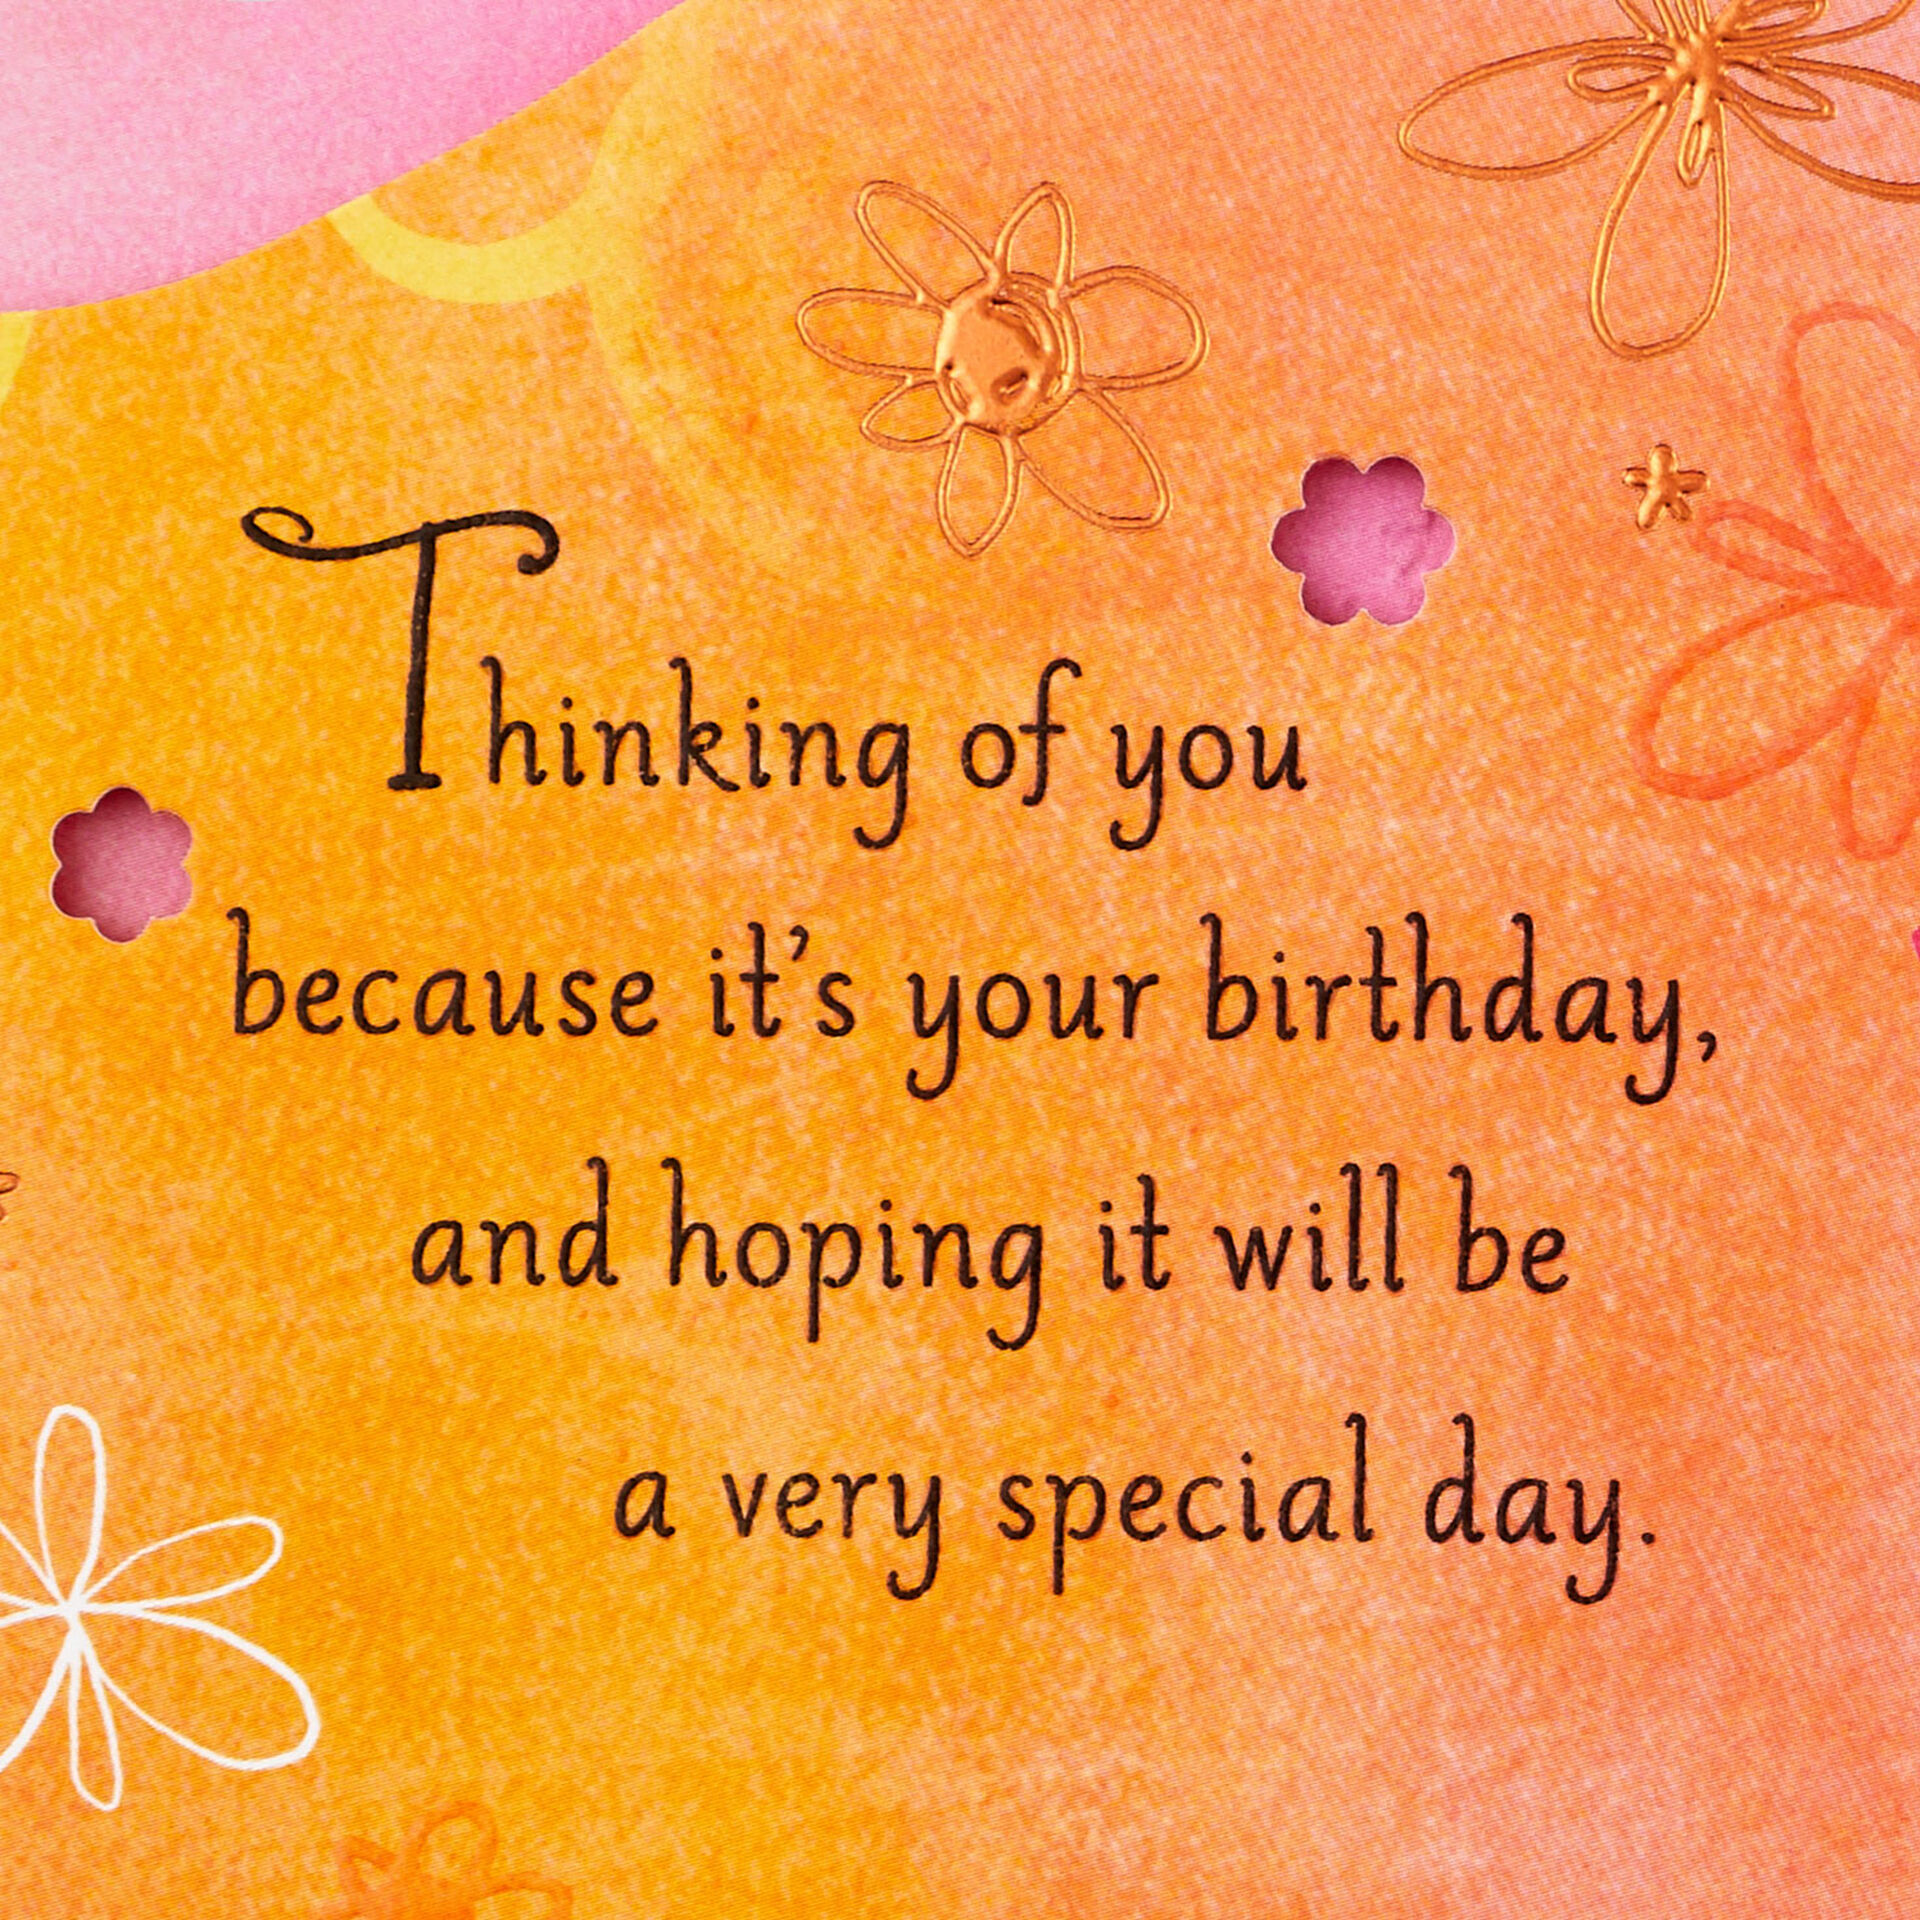 Cake-and-Flowers-Birthday-Card-for-Aunt_399FBD9373_02